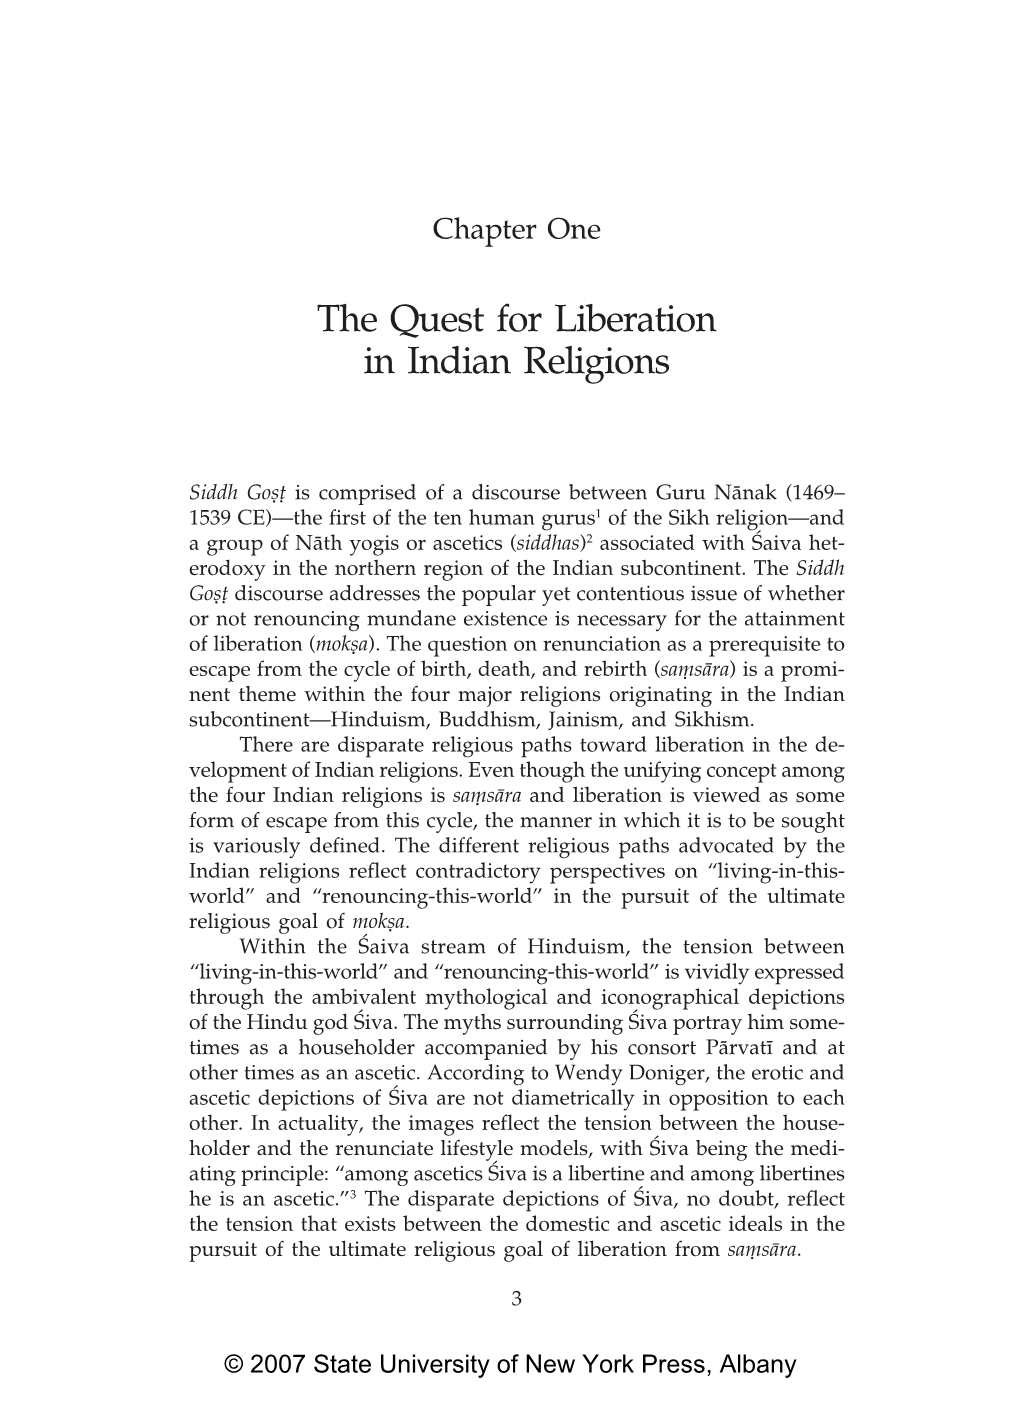 The Quest for Liberation in Indian Religions